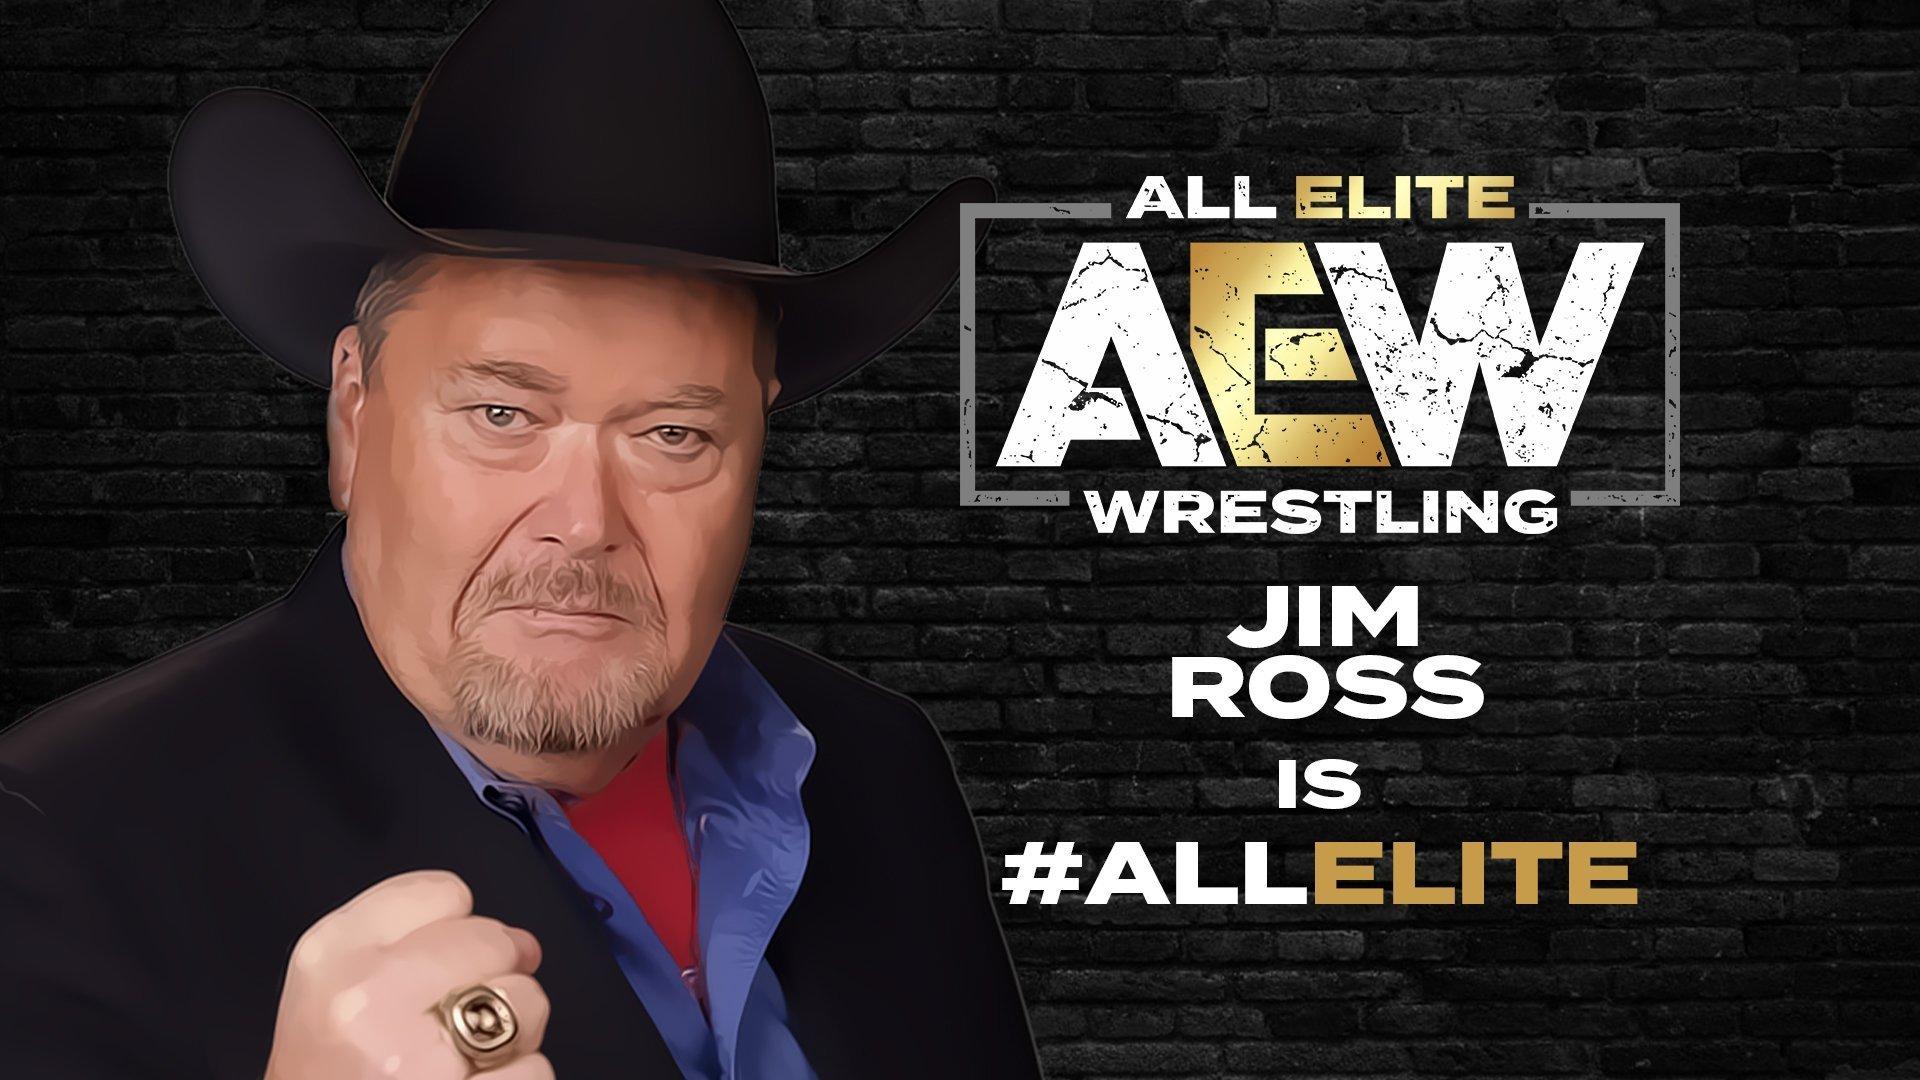 Jim Ross signs with AEW. Will call Double Or Nothing PPV